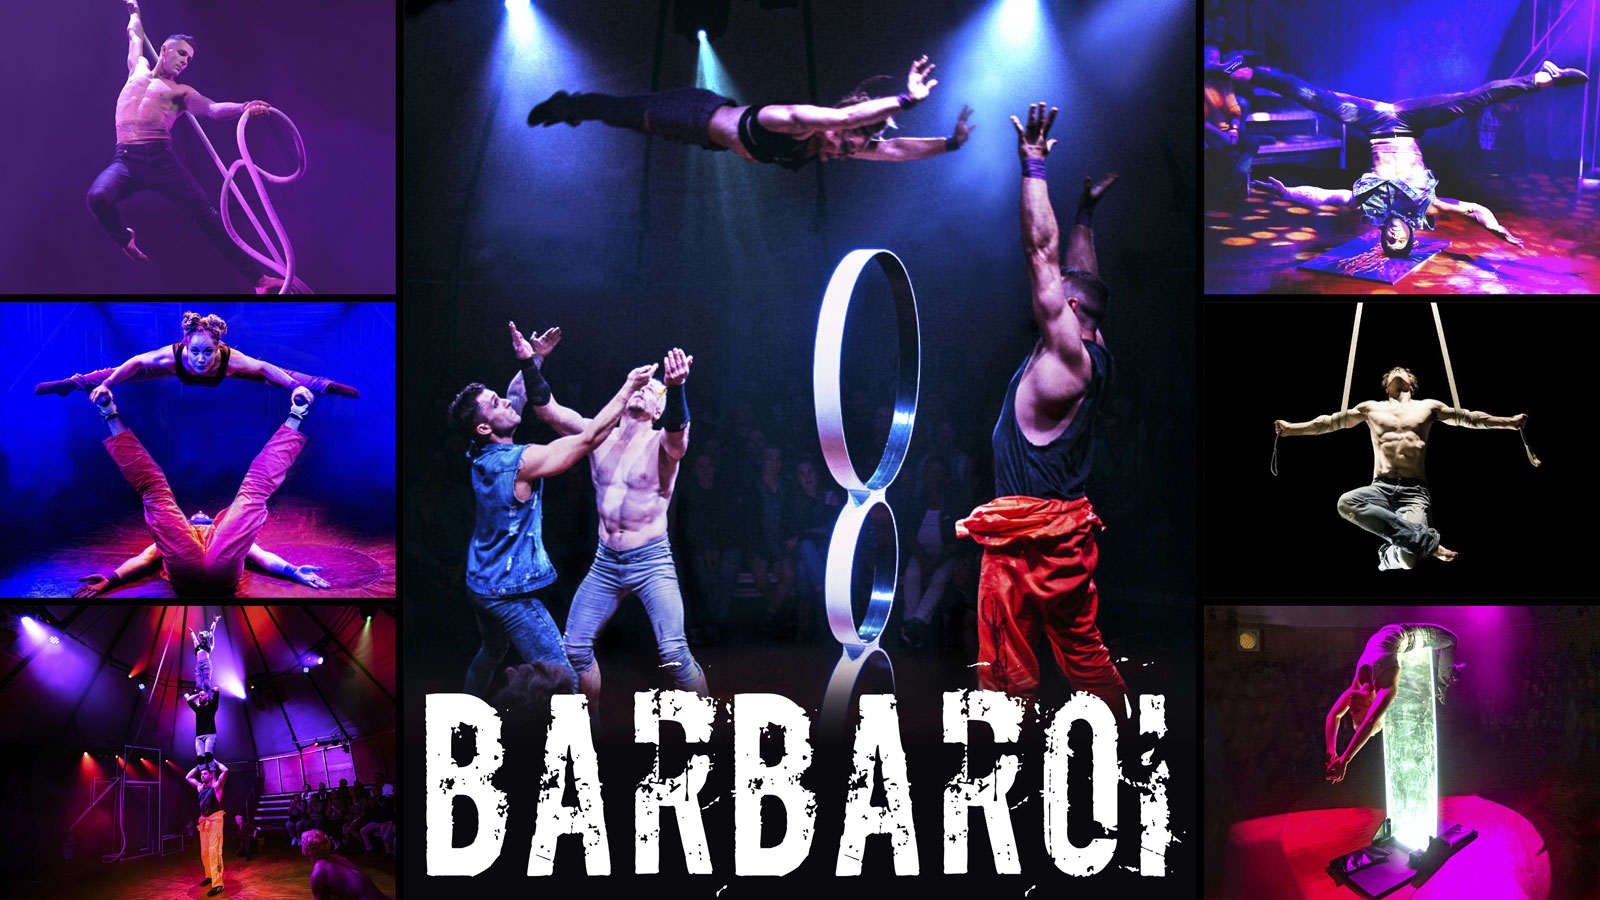 A collage of images from the circus show barbaroi